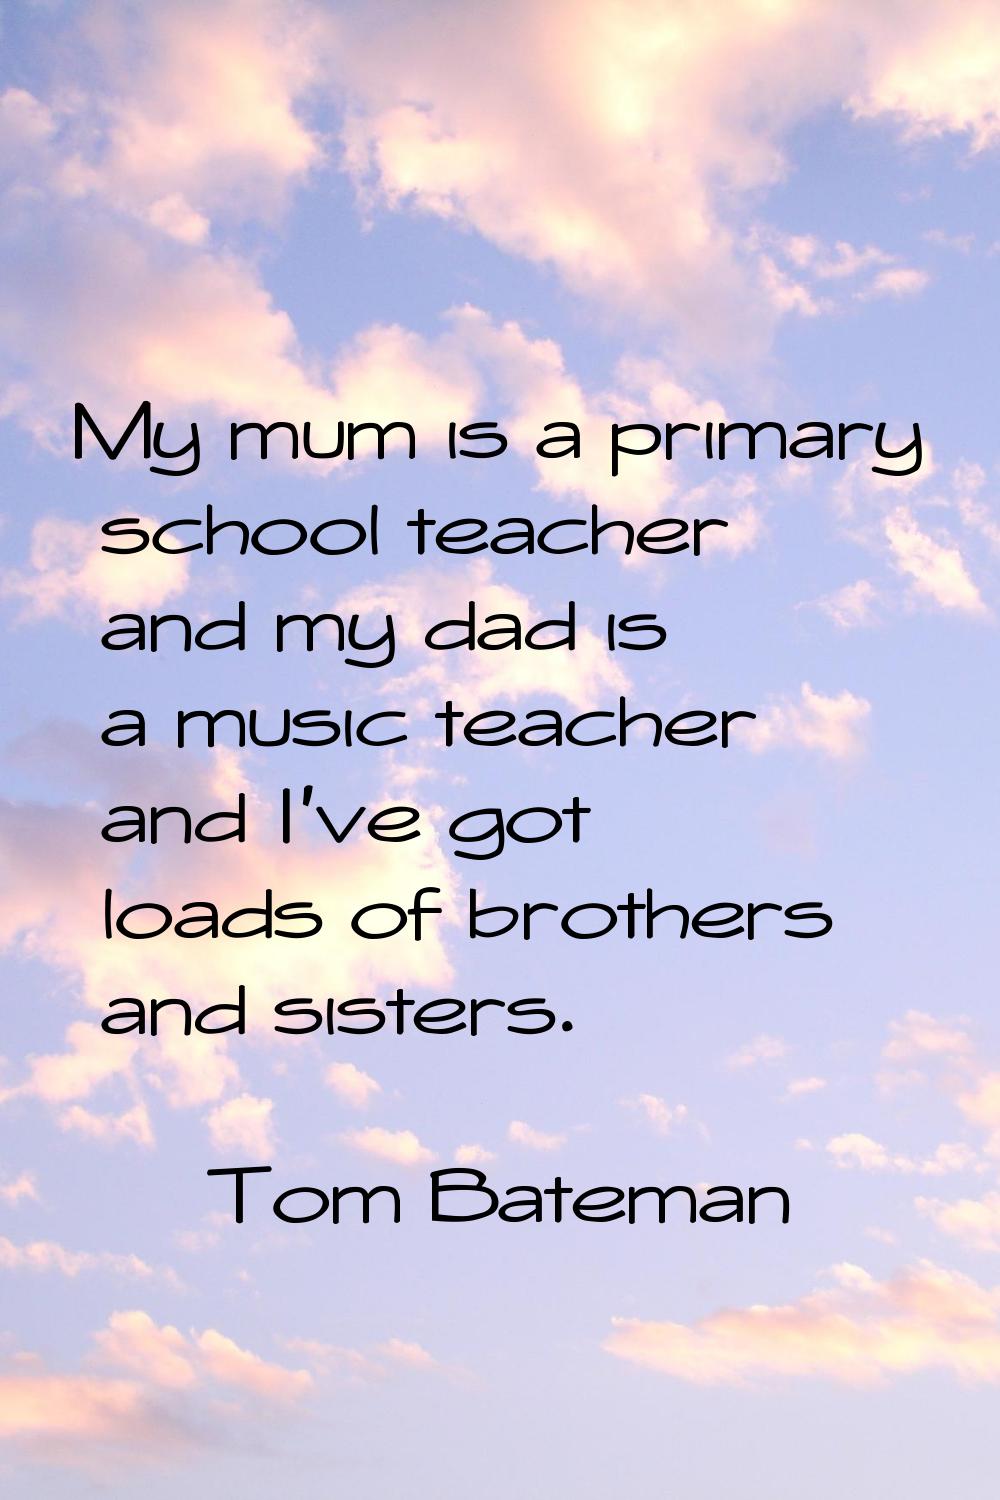 My mum is a primary school teacher and my dad is a music teacher and I've got loads of brothers and